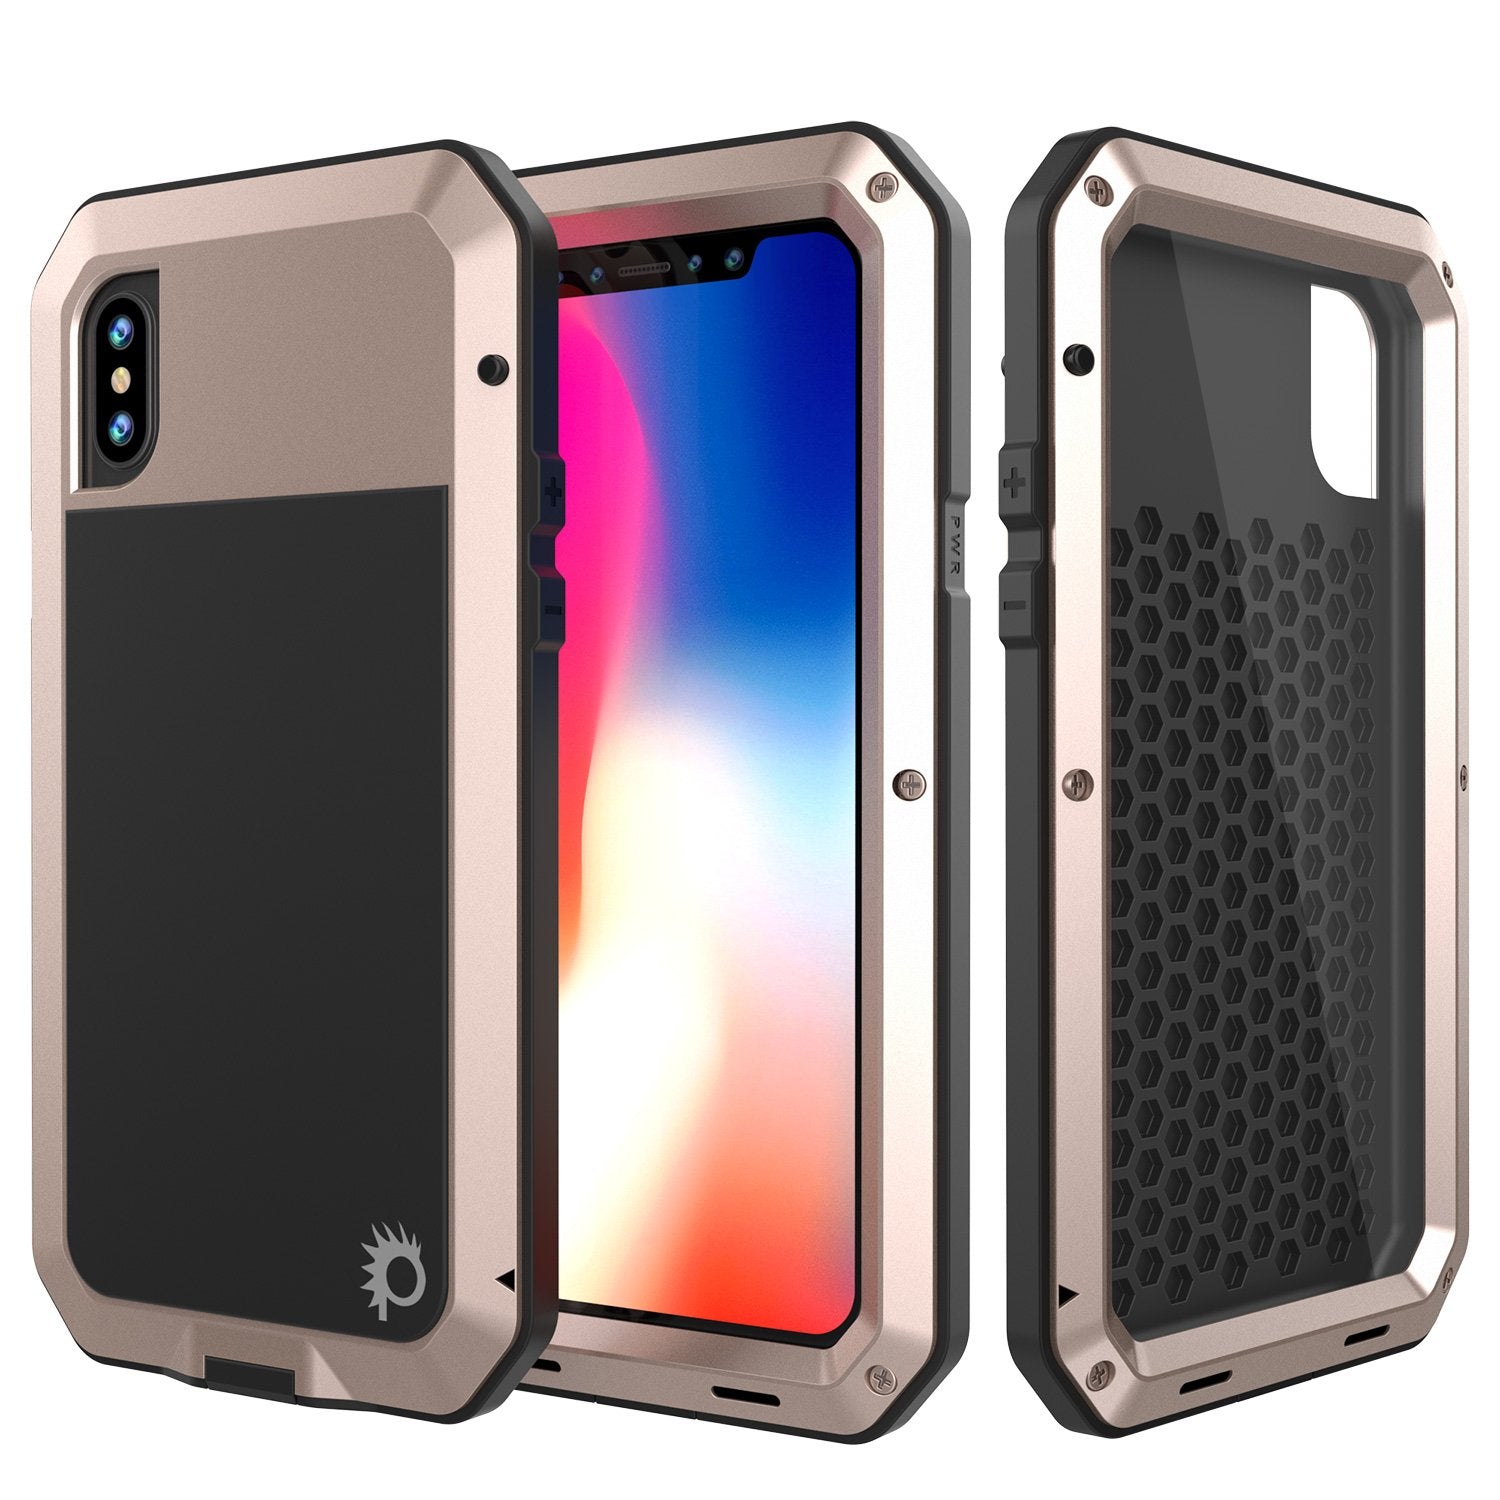 iPhone X Metal Case, Heavy Duty Military Grade Rugged Armor Cover [shock proof] Hybrid Full Body Hard Aluminum & TPU Design [non slip] W/ Prime Drop Protection for Apple iPhone 10 [Gold]